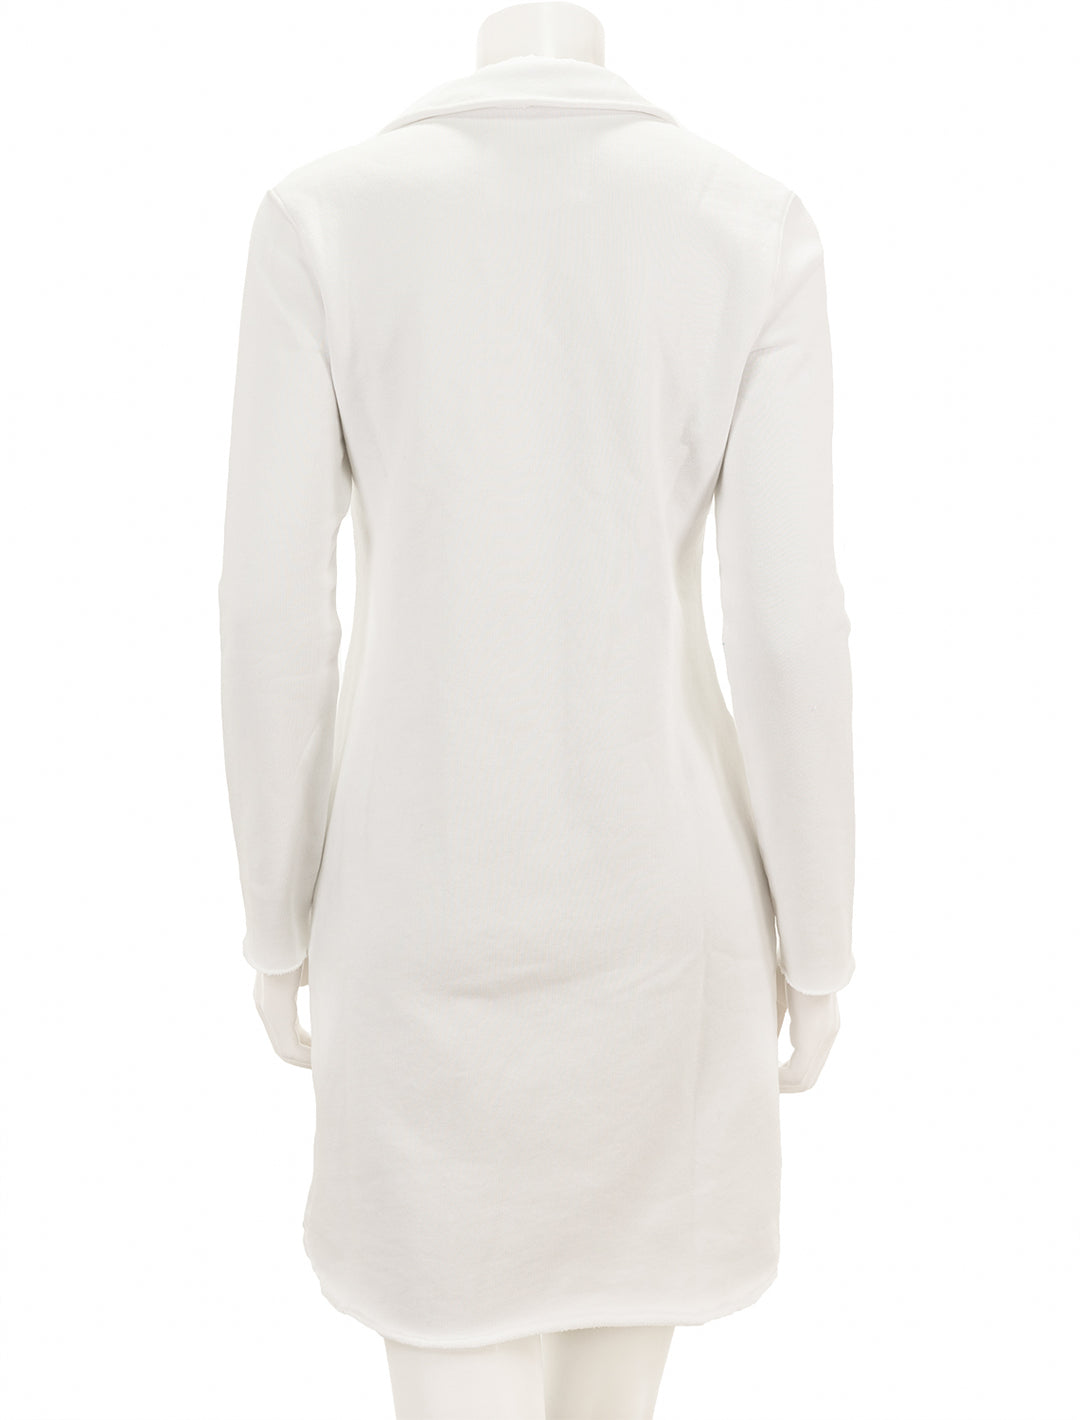 Back view of Frank & Eileen's long sleeve polo dress in white.